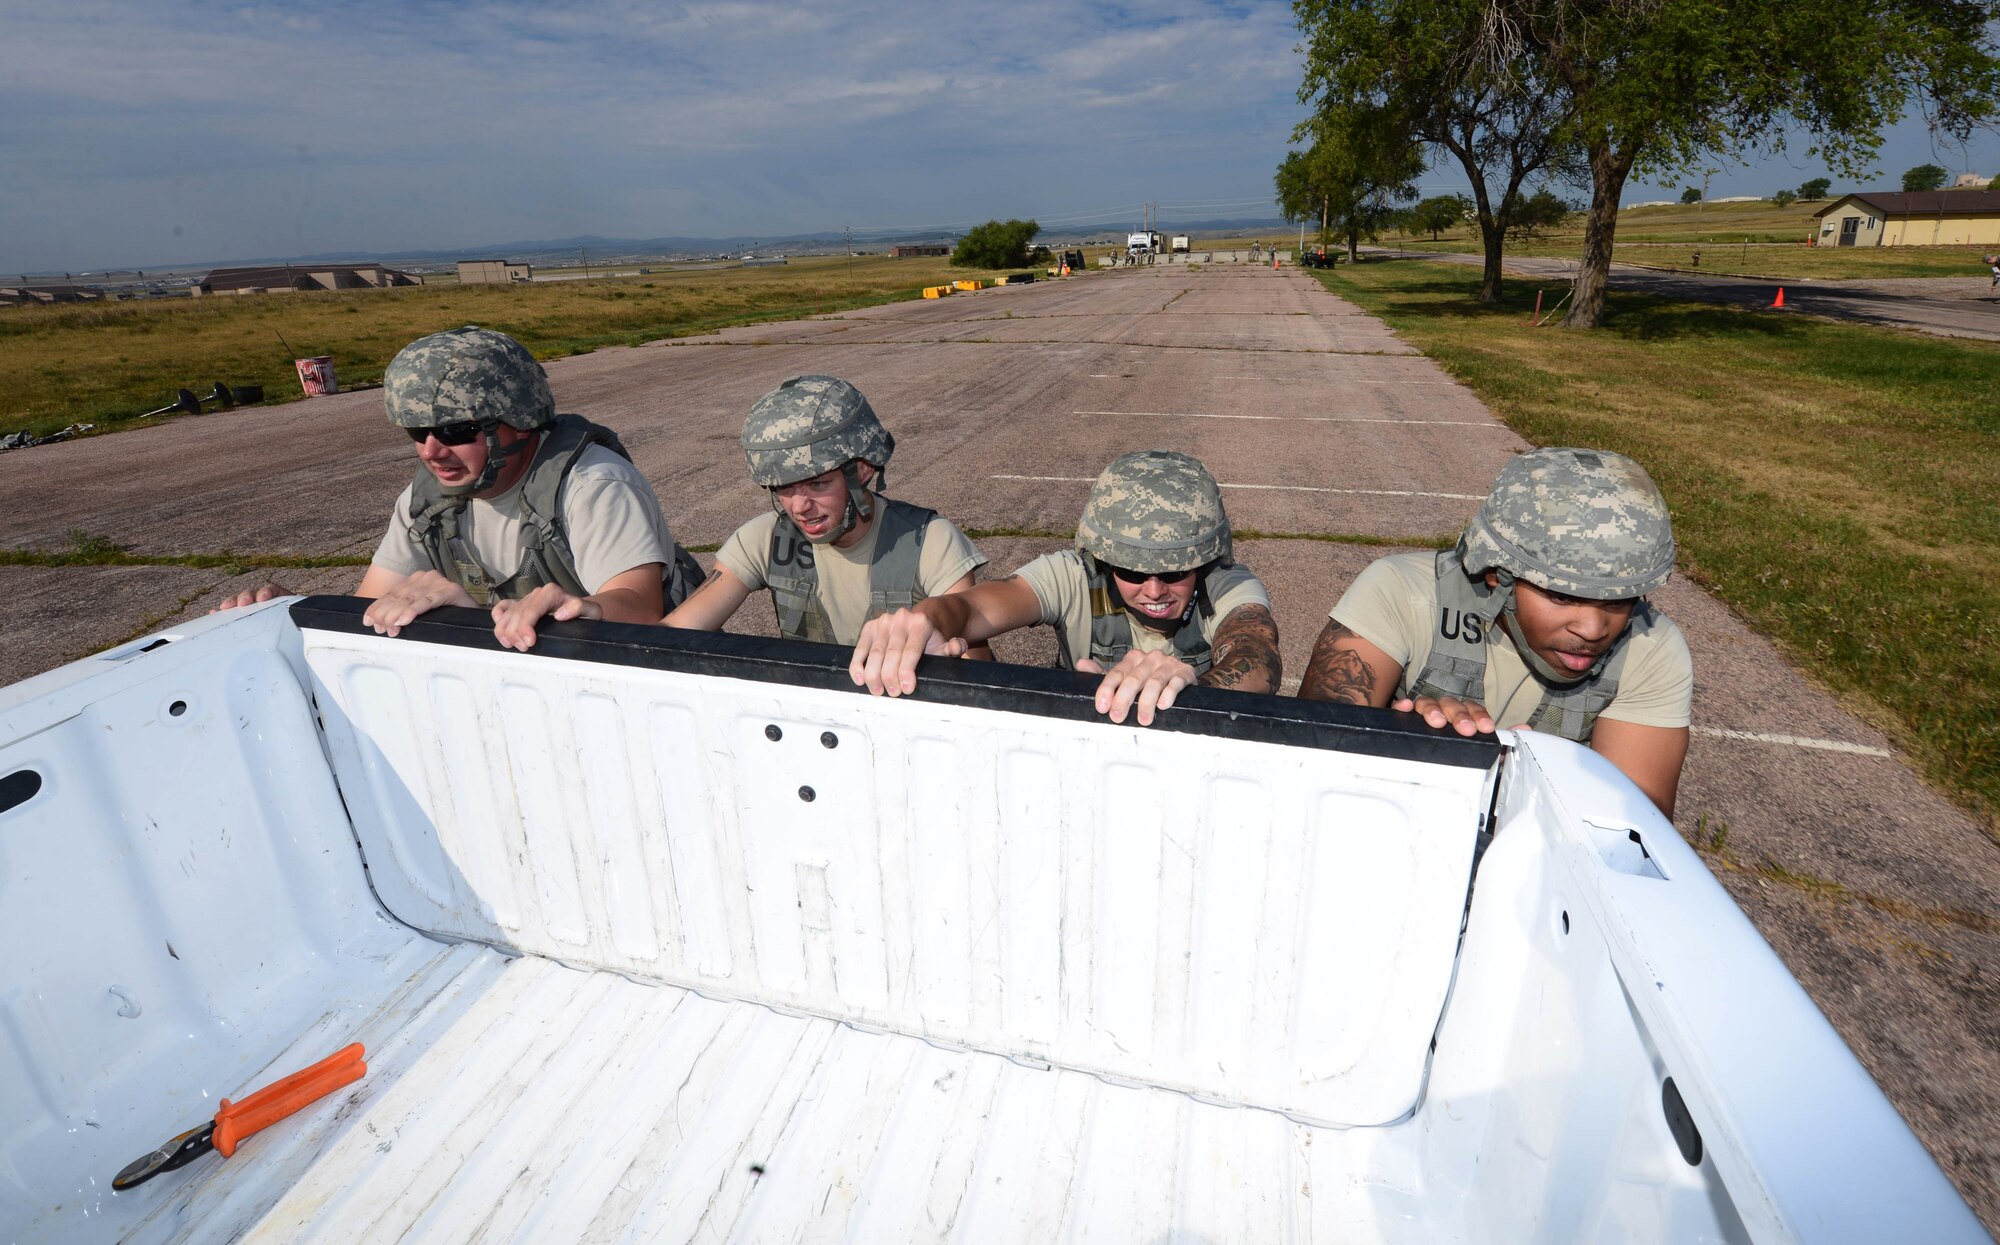 Airmen assigned to the 28th Civil Engineer Squadron push a six-passenger vehicle during the Prime Base Engineer Emergency Force (BEEF) challenge at Ellsworth Air Force Base, S.D., Aug. 17, 2017.